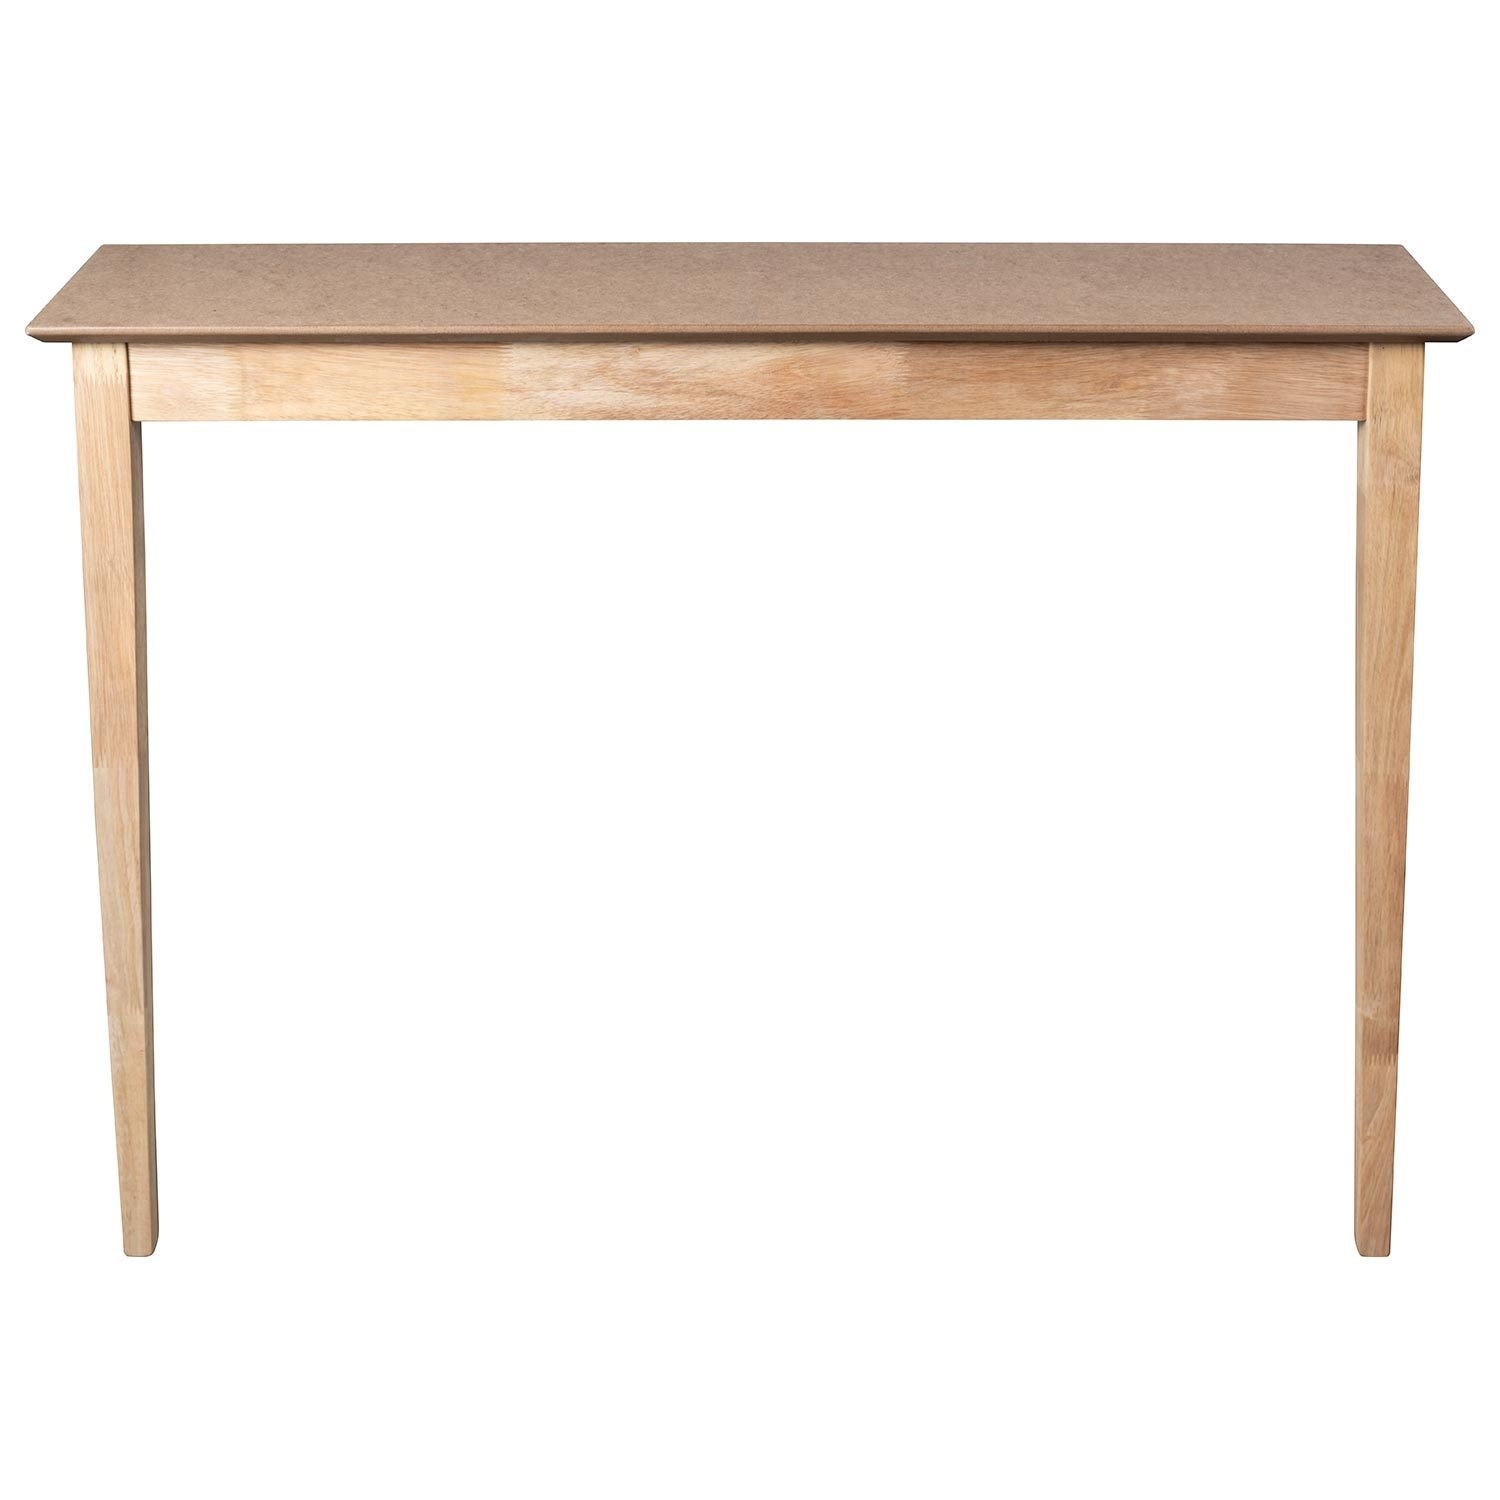 Photo of Small & narrow unfinished wall mounted console table - ava